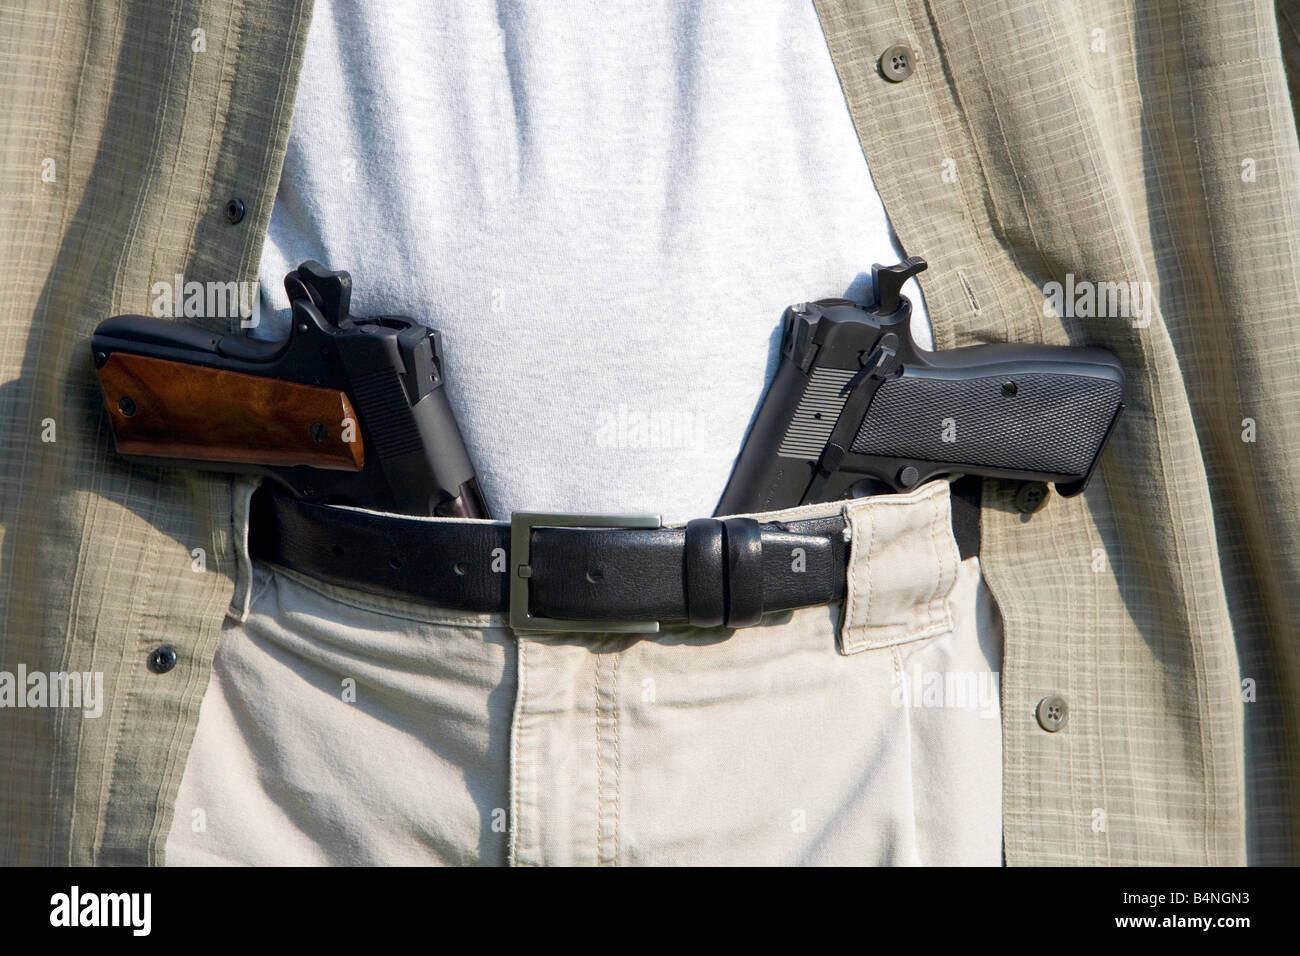 Two handguns sits in a man's belt. Stock Photo